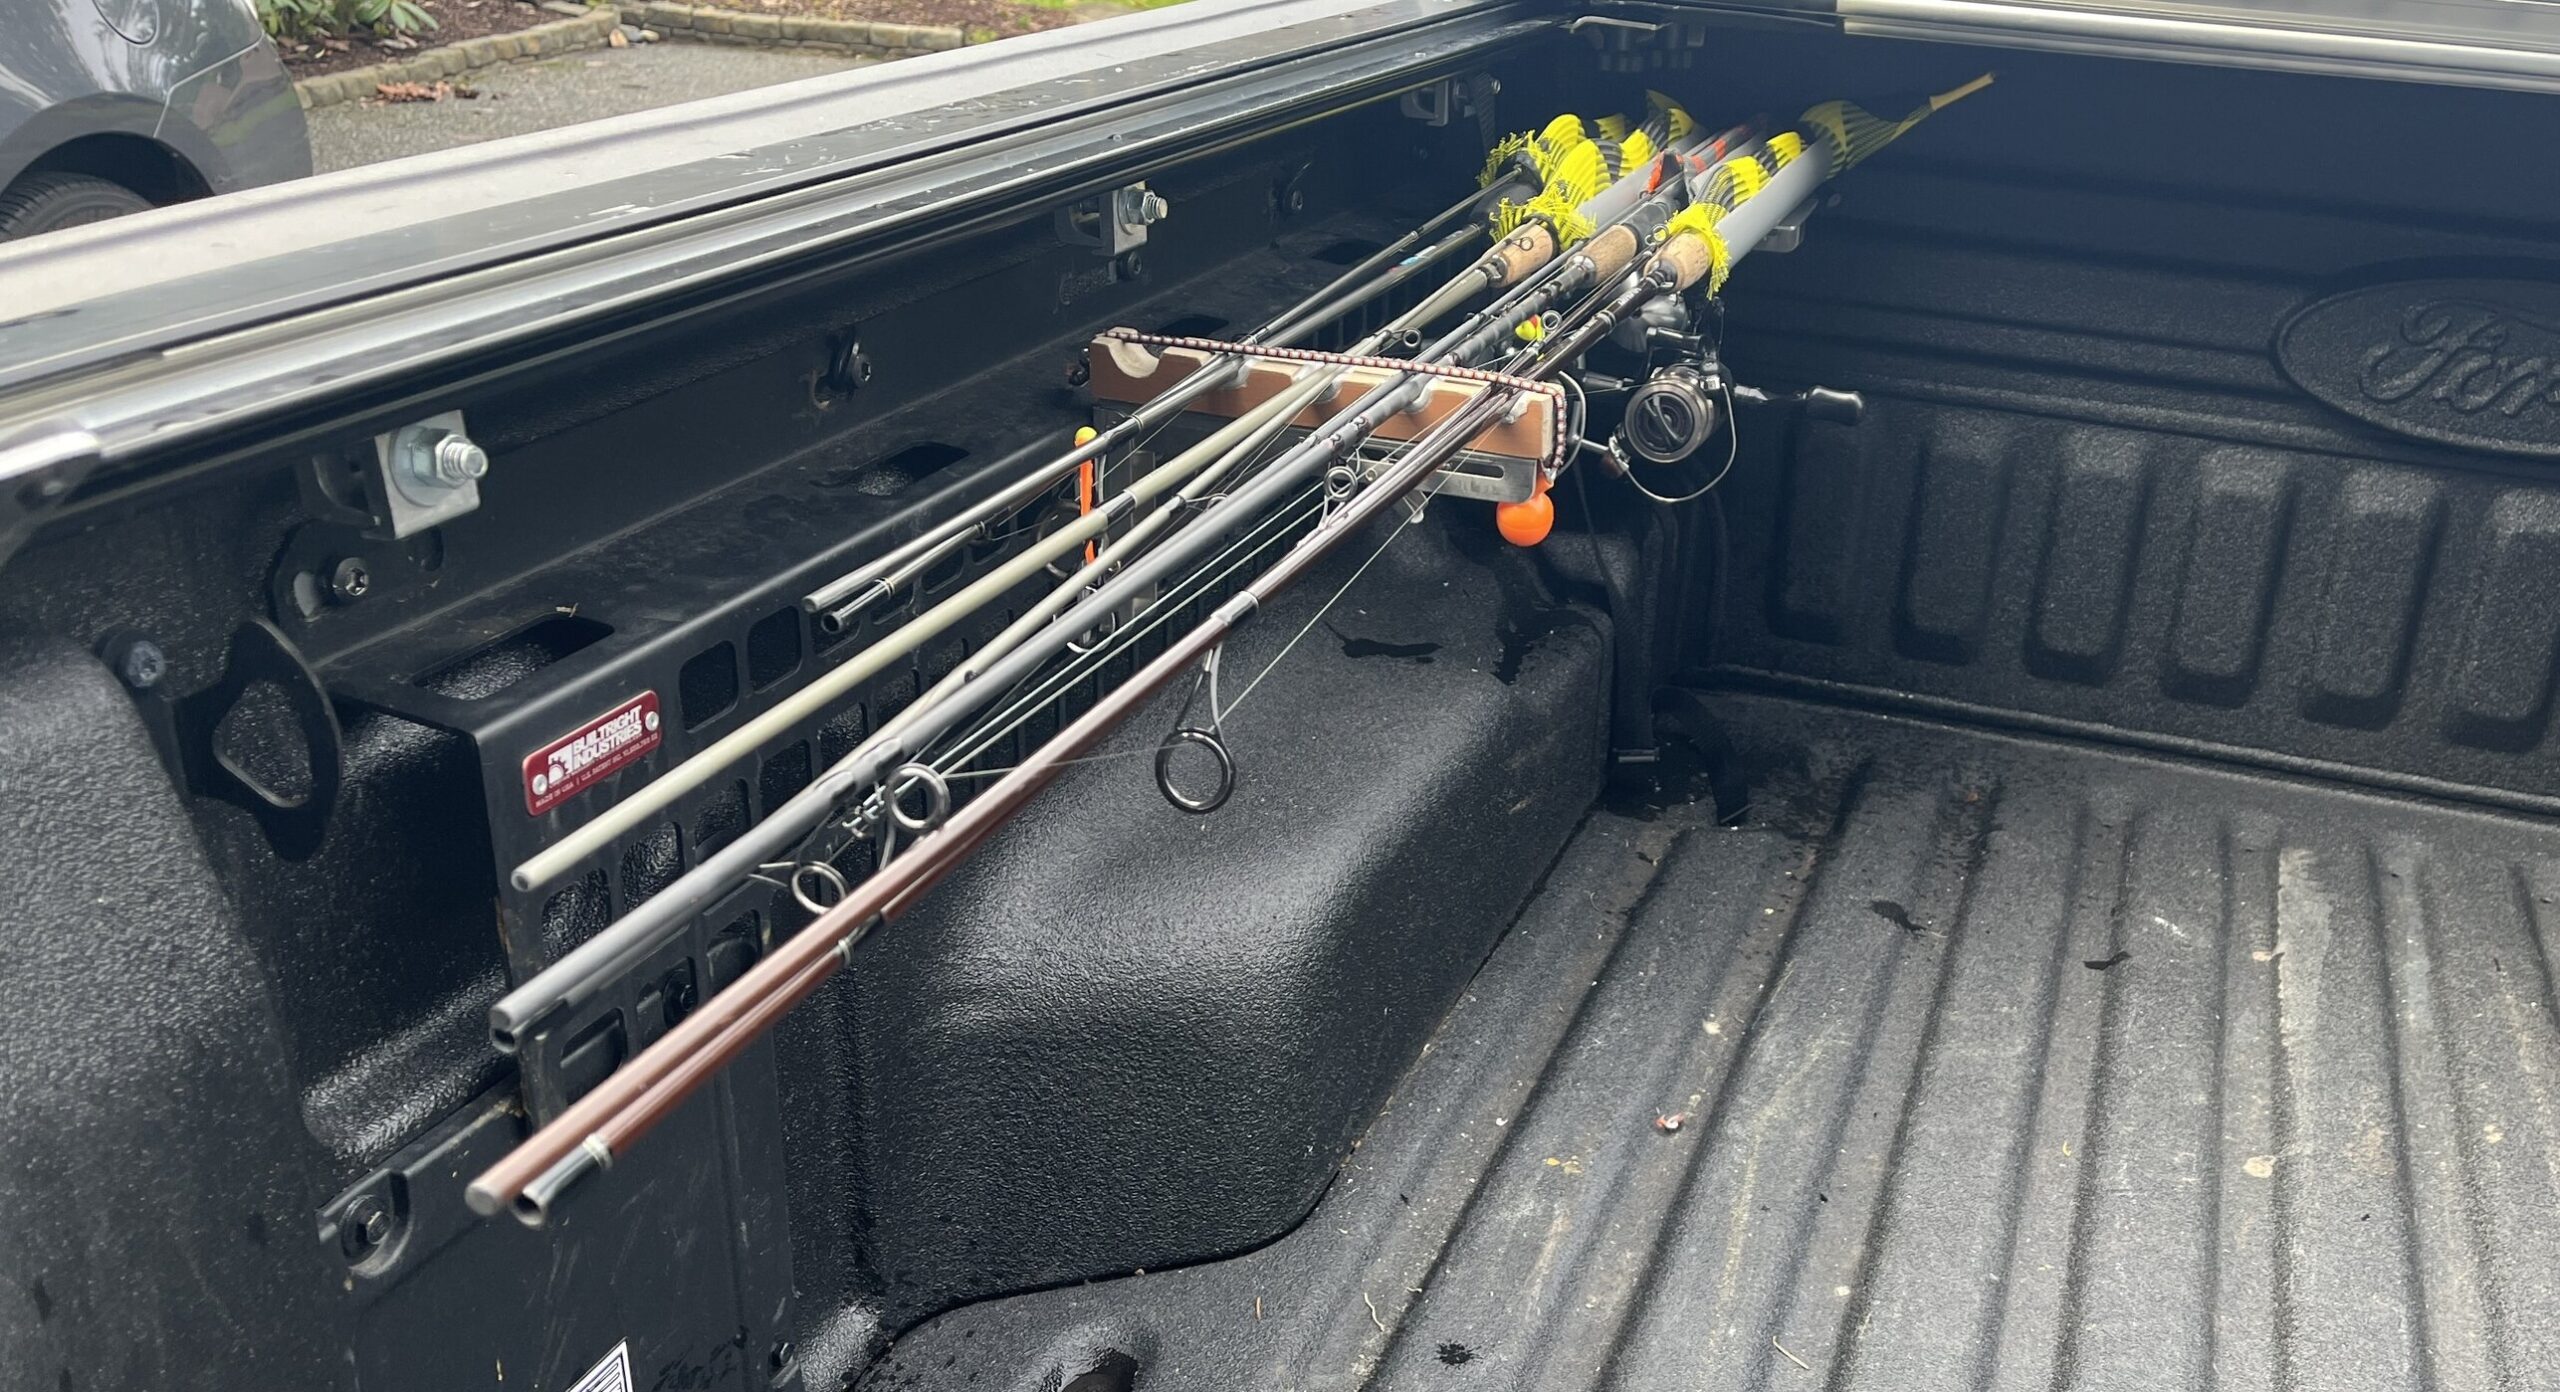 Fishing Rod Holder for Pickup Truck Bed That Keeps Rods Above